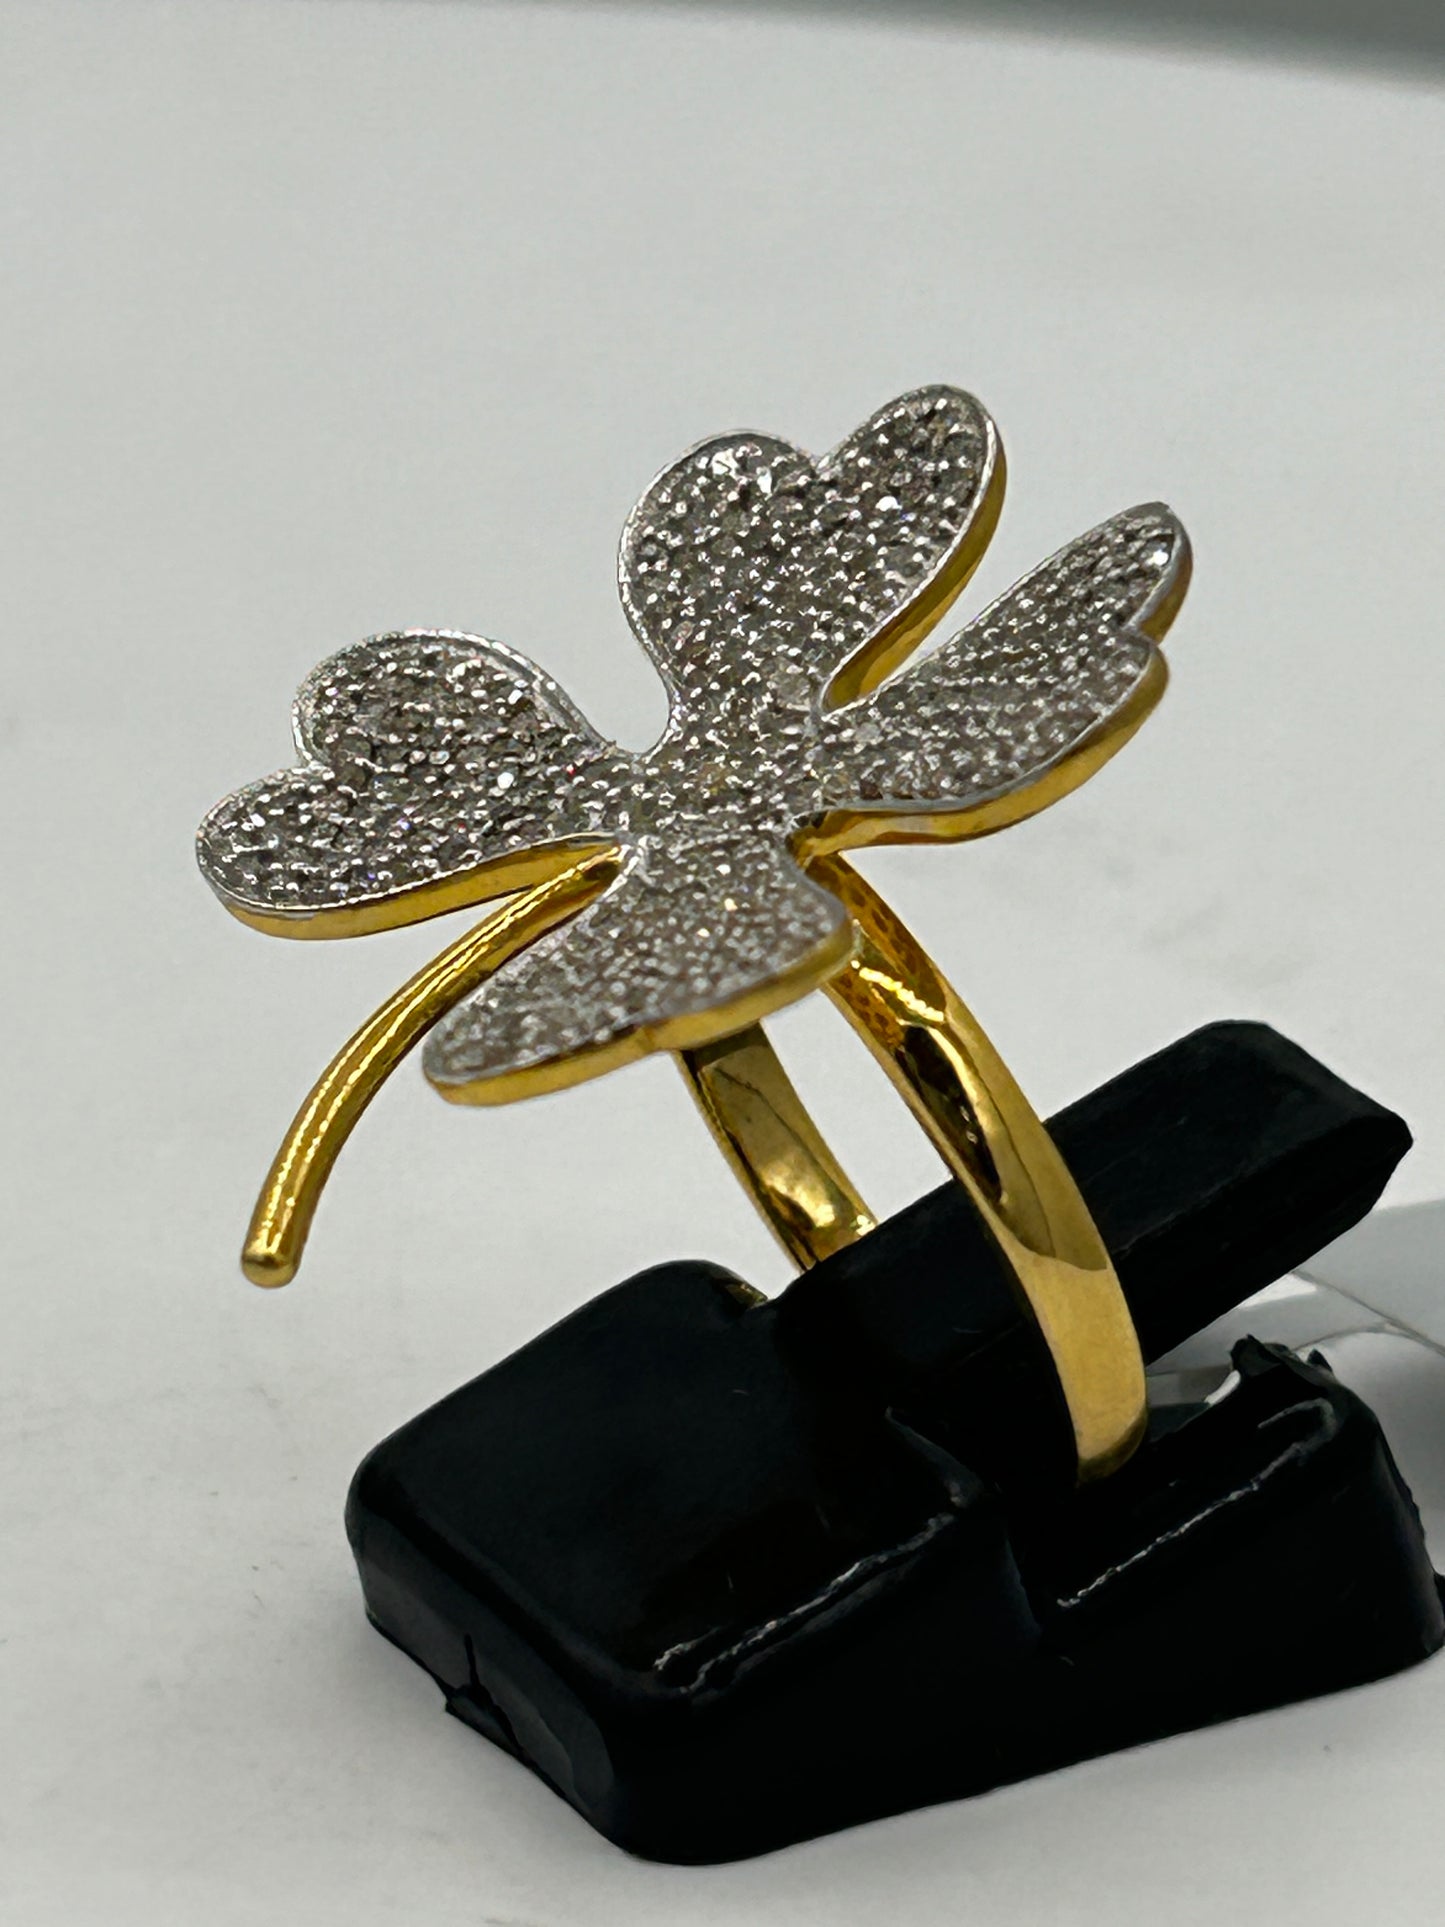 14k Solid Gold Flower Diamond Rings. Genuine handmade pave diamond Rings. Approx Size 1.04 "(26 x 26 mm)